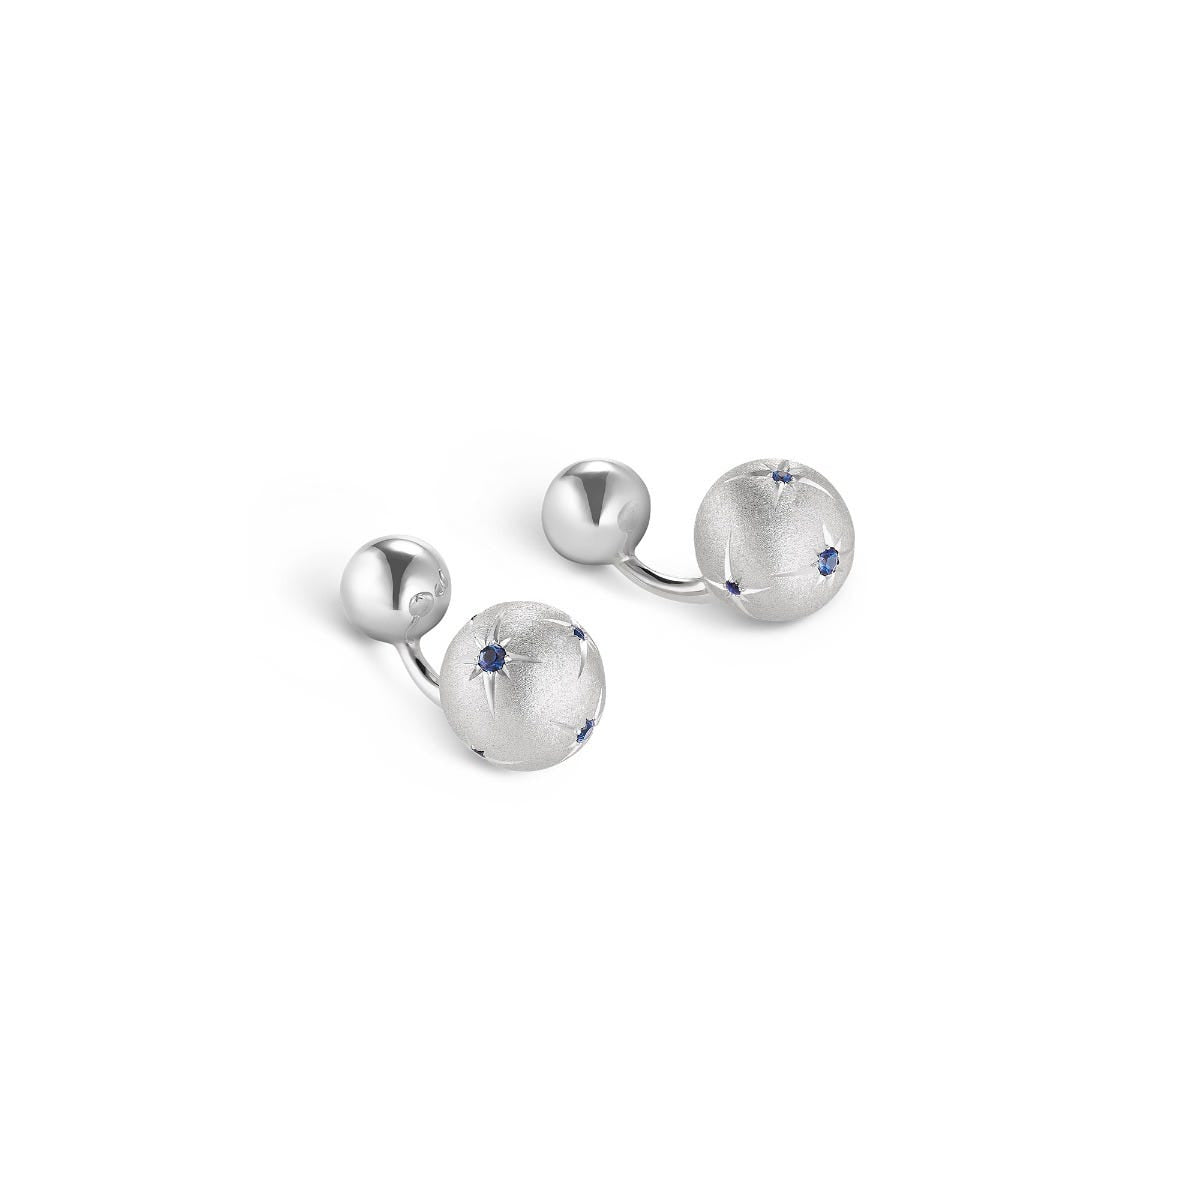 Cosmic Shooting Stars Cufflinks in 18ct White Gold with Sapphire